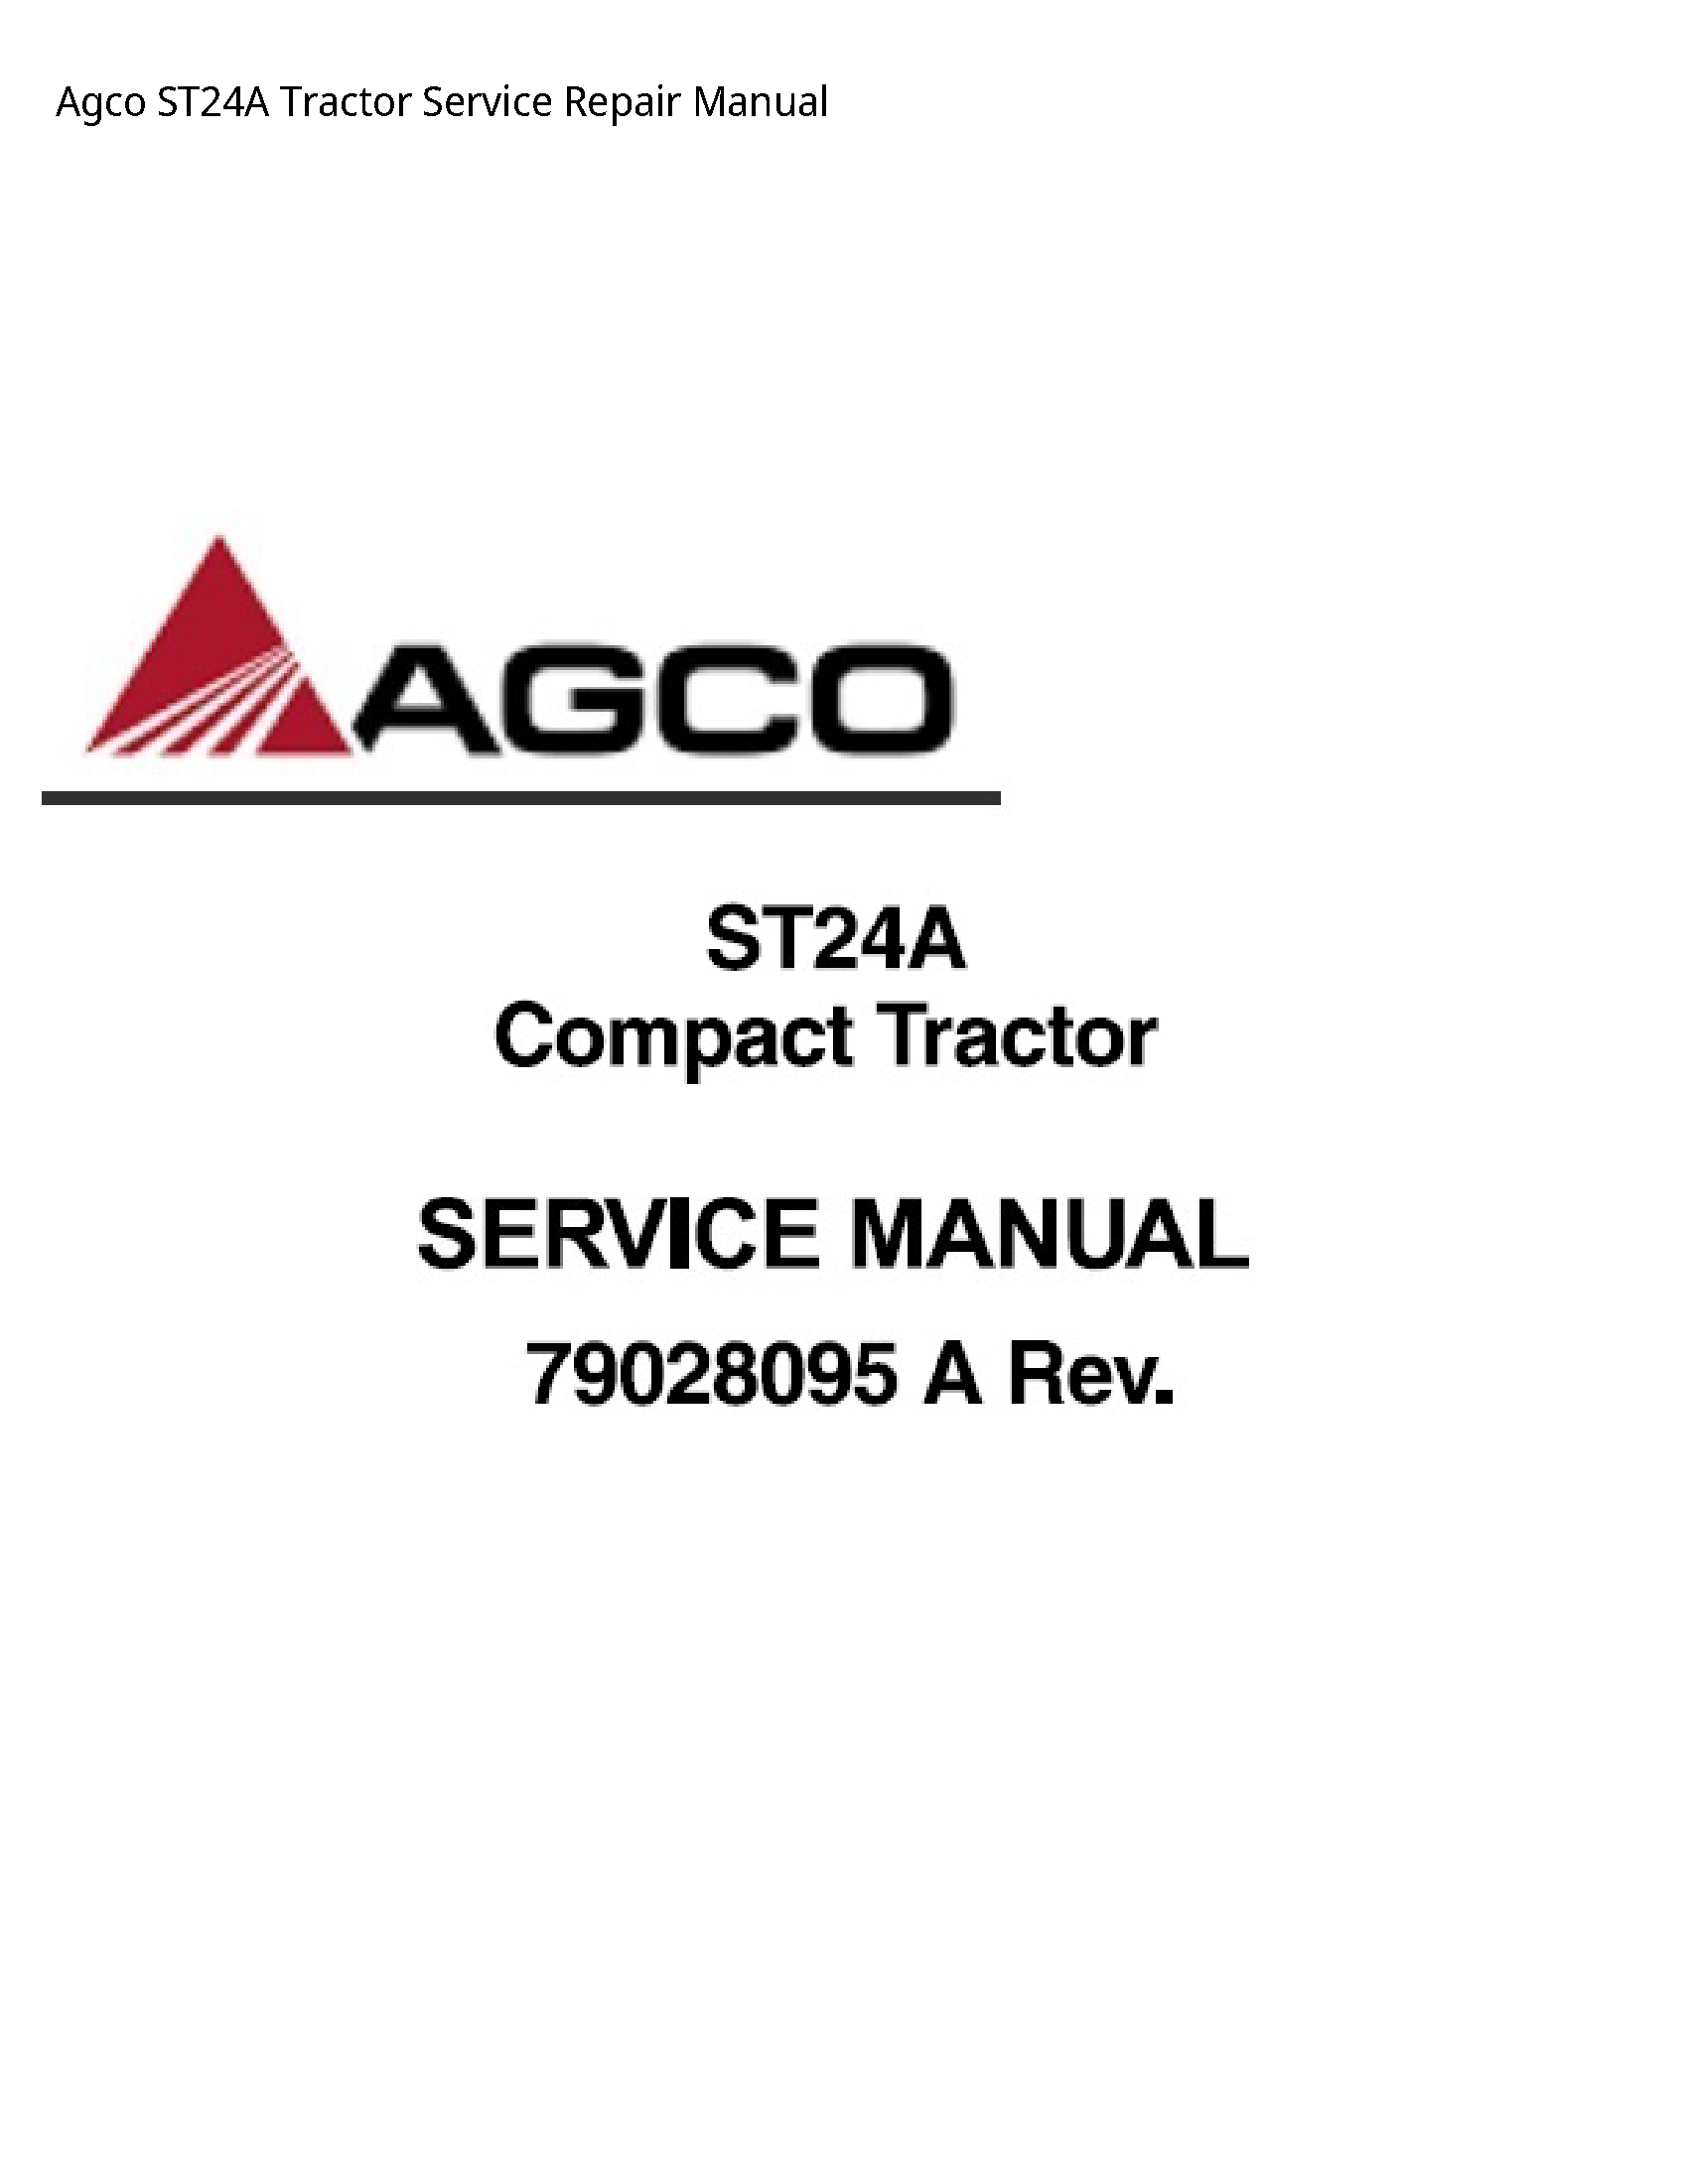 AGCO ST24A Tractor manual